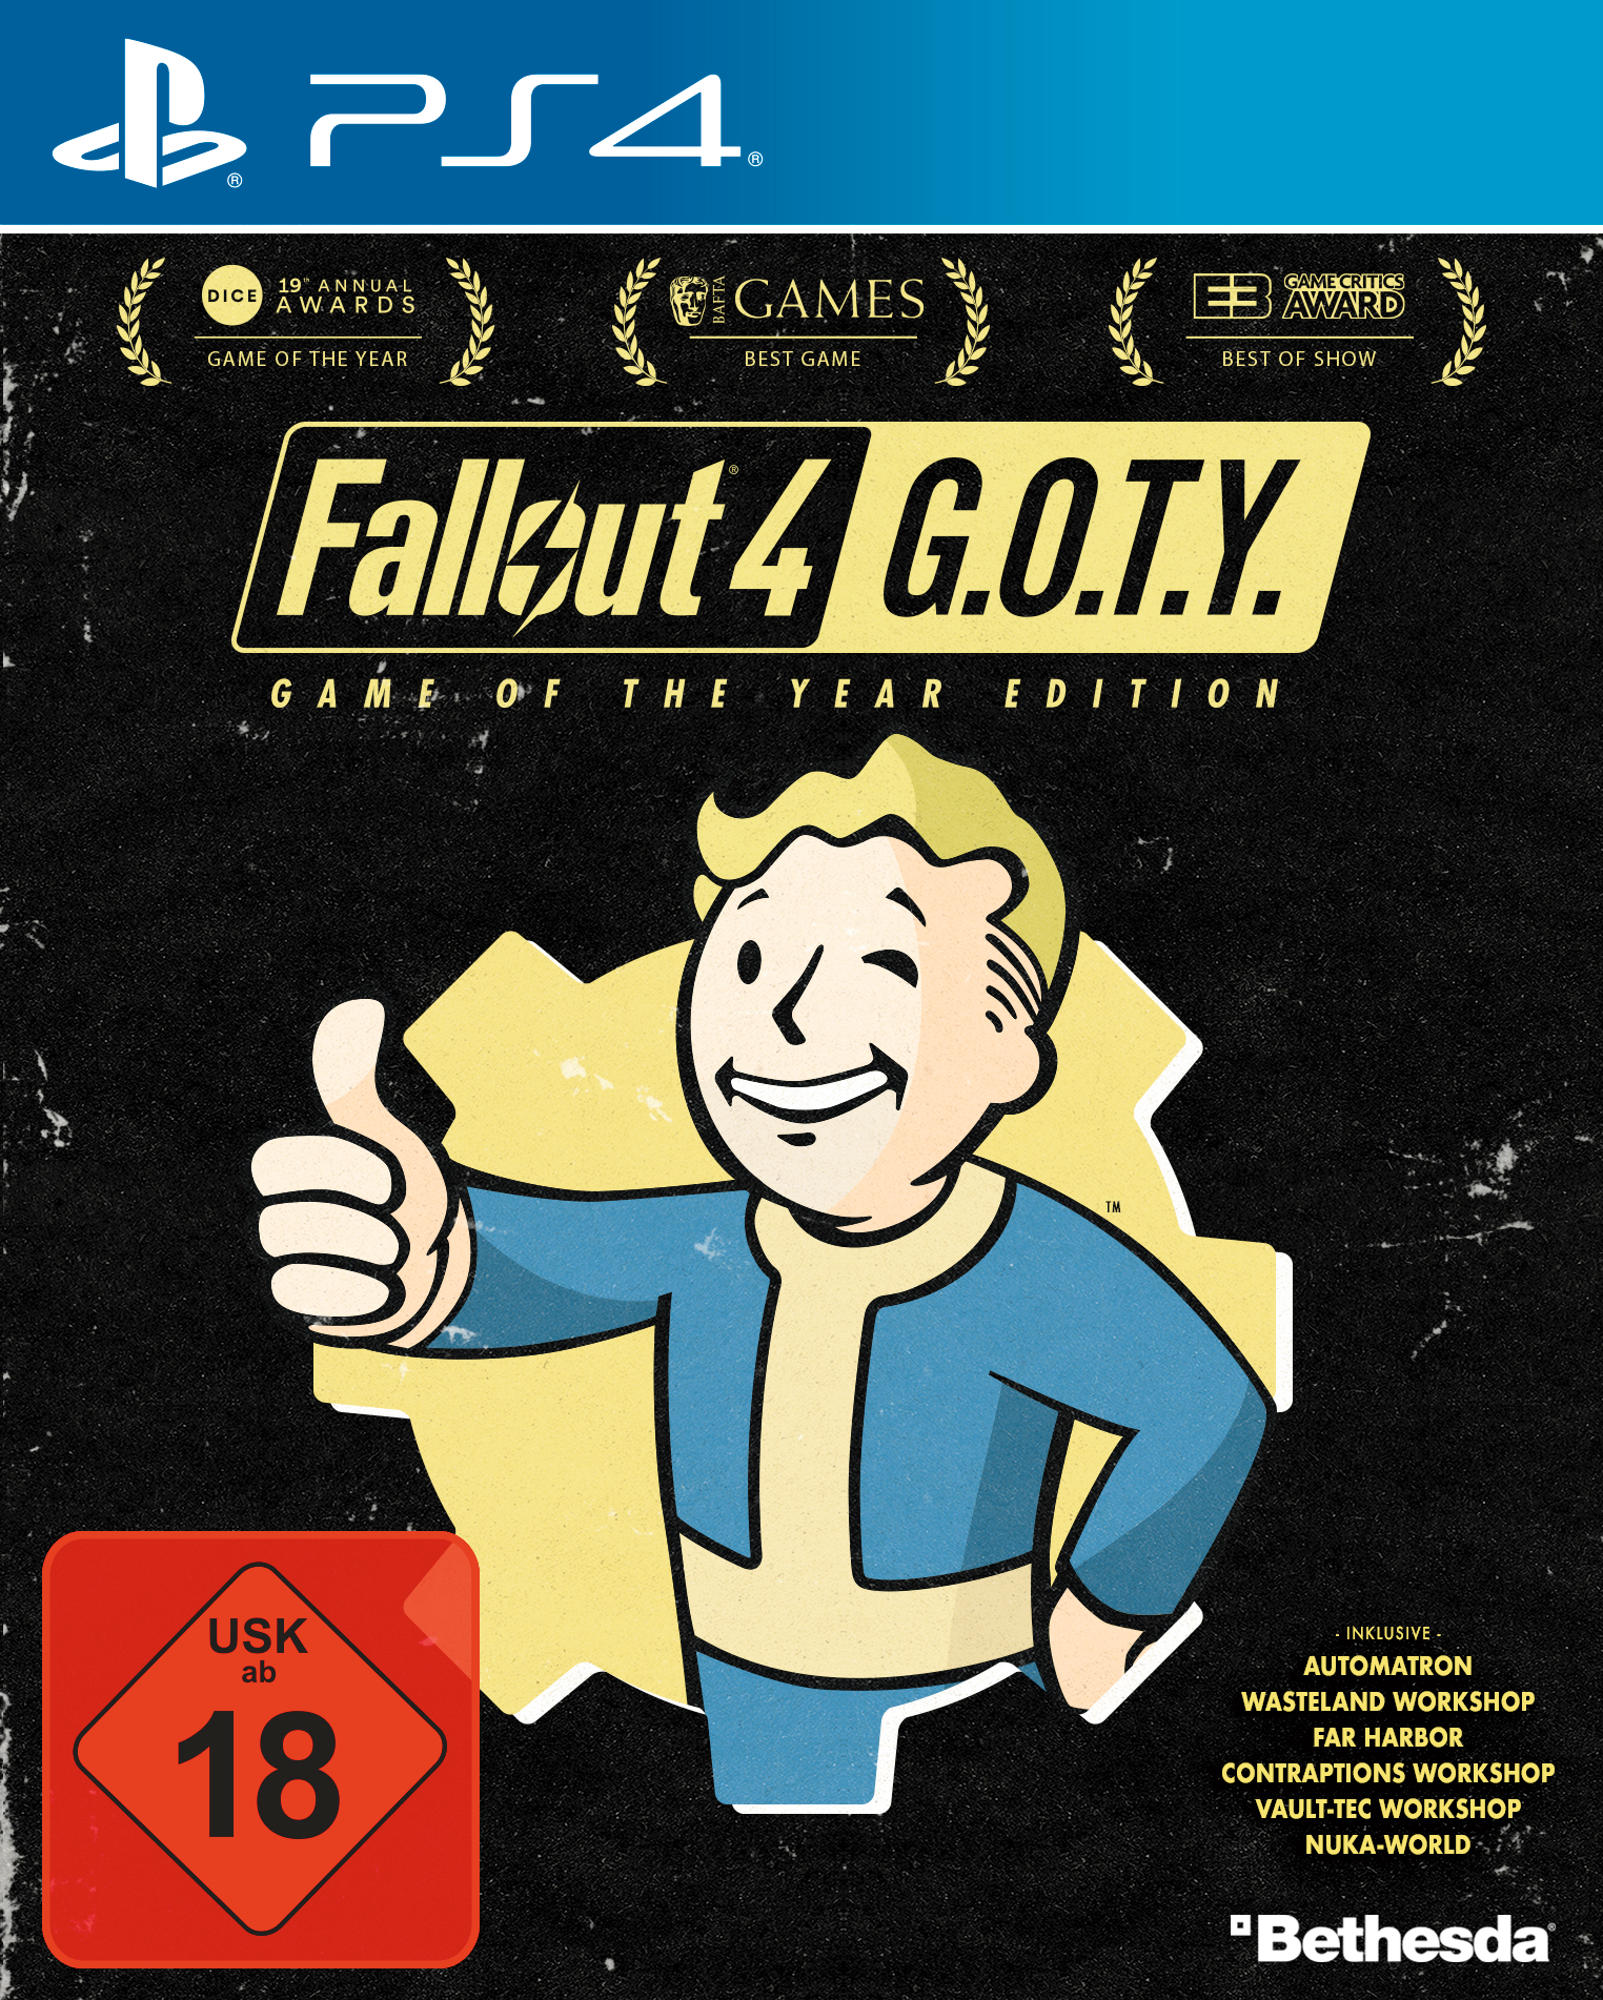 Fallout 4: - Year the Edition of 4] [PlayStation Game